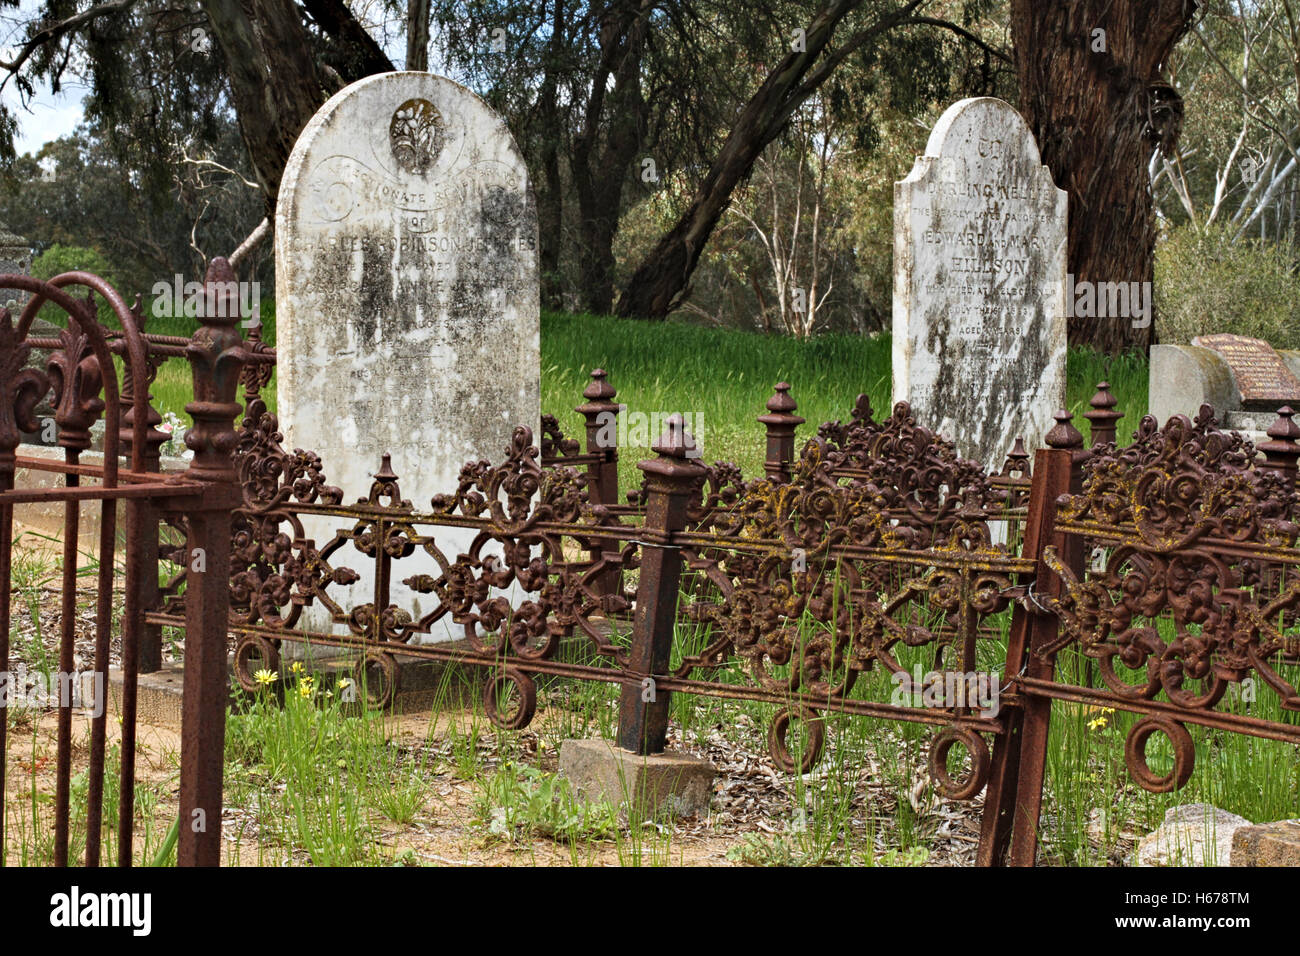 Two historic headstones in the cemetery at Tocumwal, NSW, Australia. Stock Photo